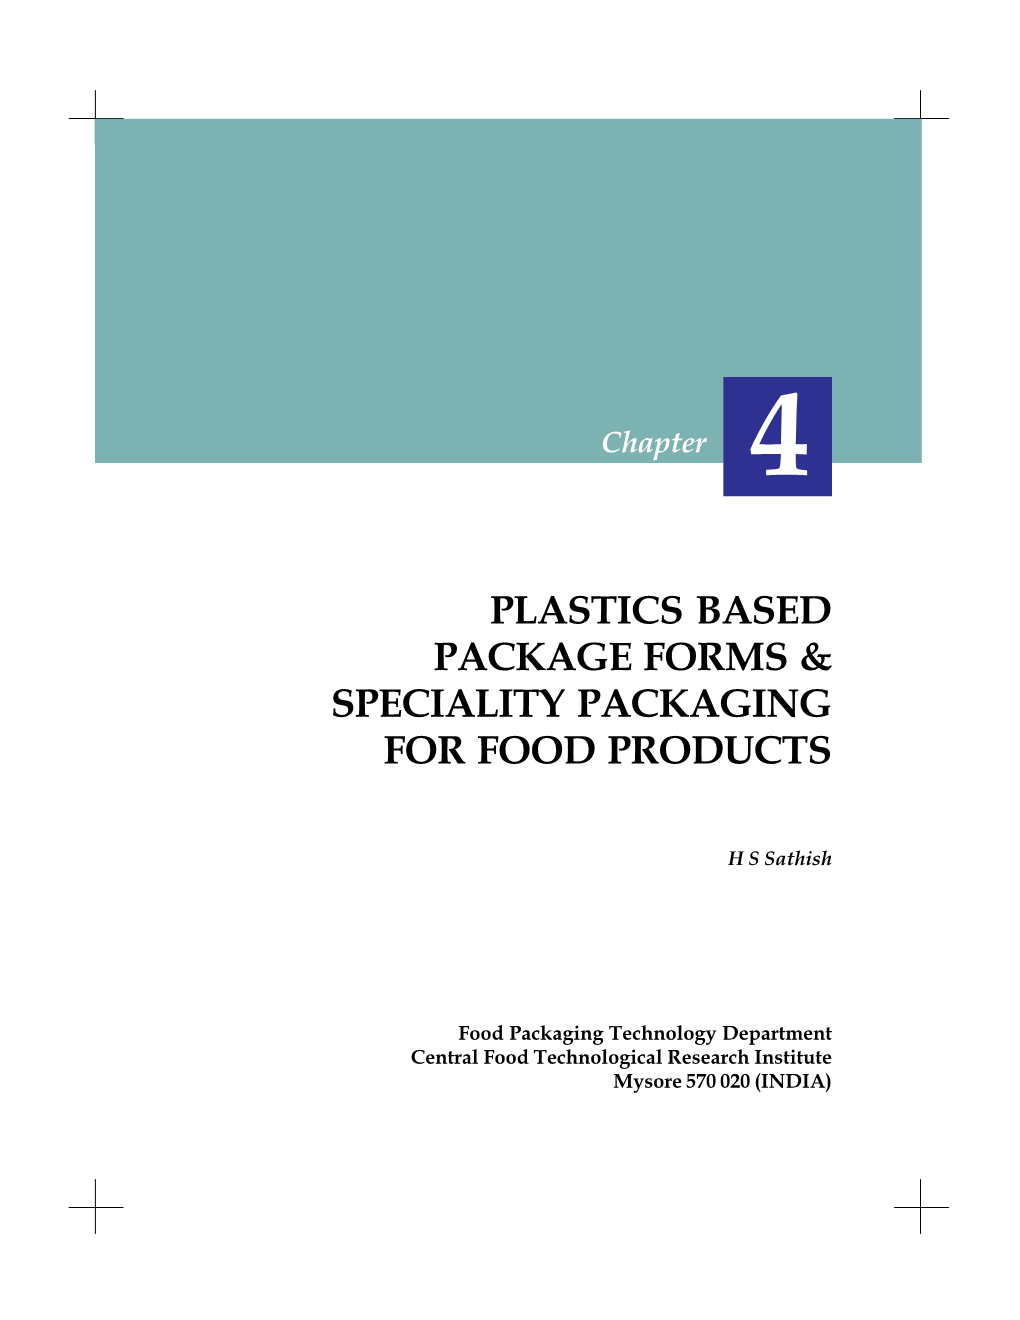 Plastics Based Package Forms & Speciality Packaging For